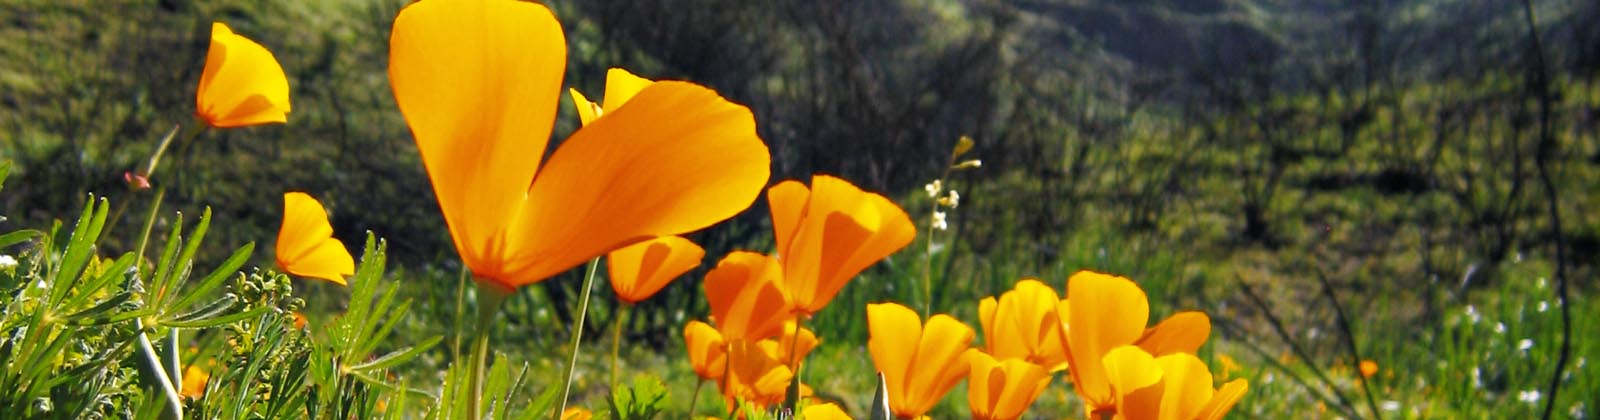 CANCELLED due to Fire Weather: Acorn Planting to Restore Oak Woodlands in Upper Weir Canyon